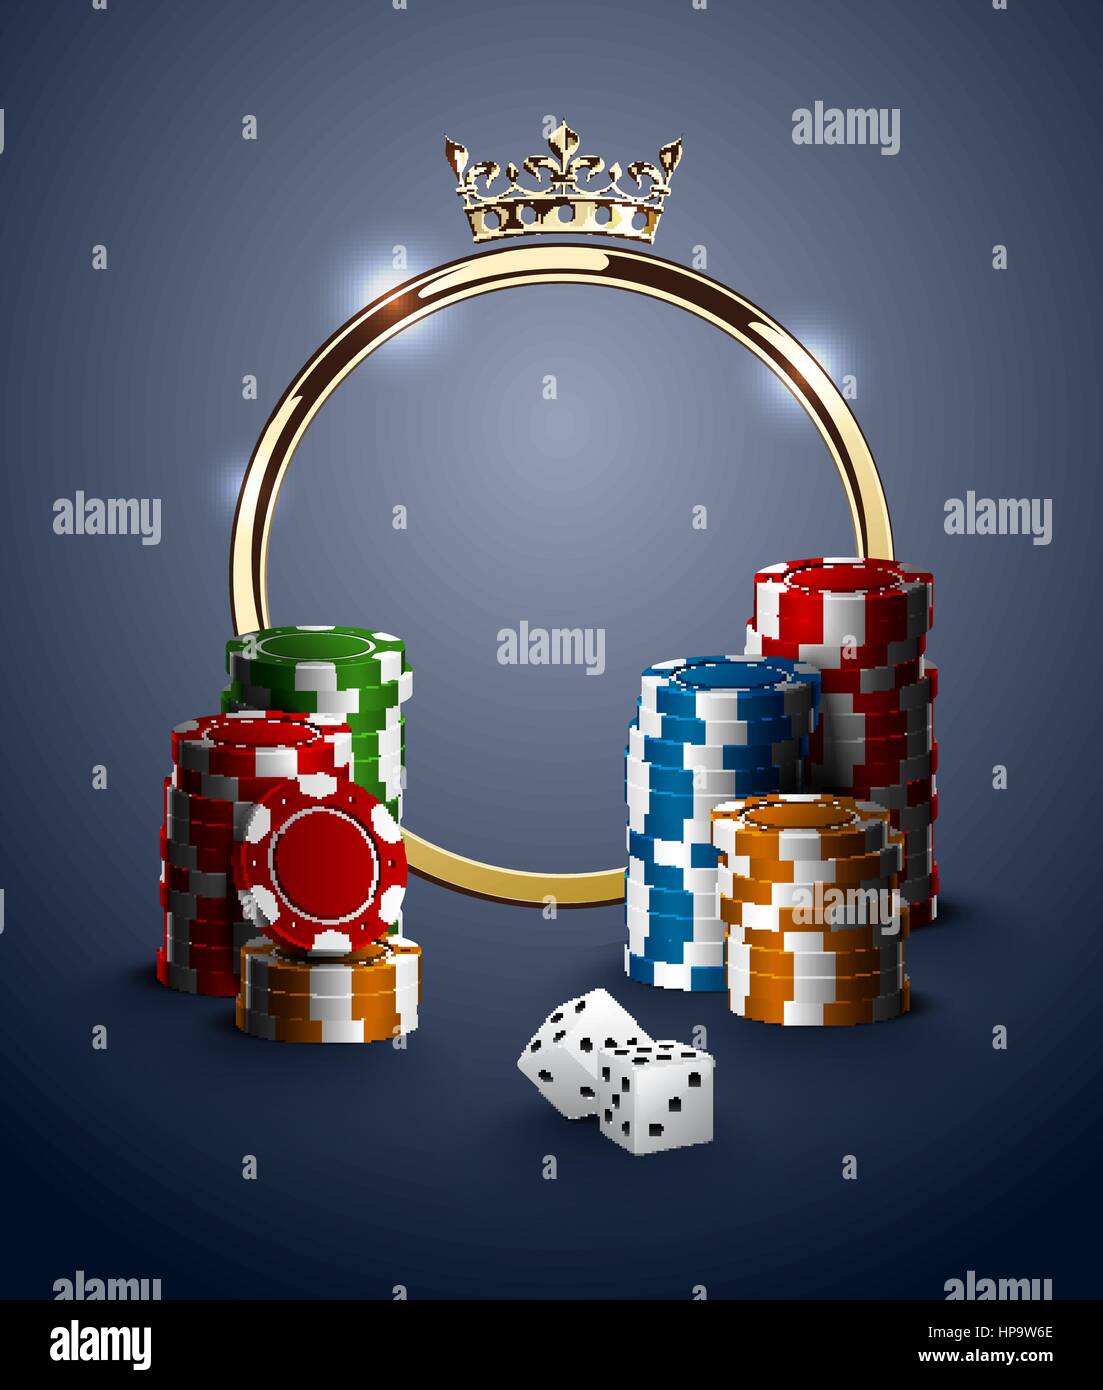 Round casino roulette golden frame with crown, stack of poker chips and white dice on deep blue background. Gambling online club vintage poster. Stock Vector